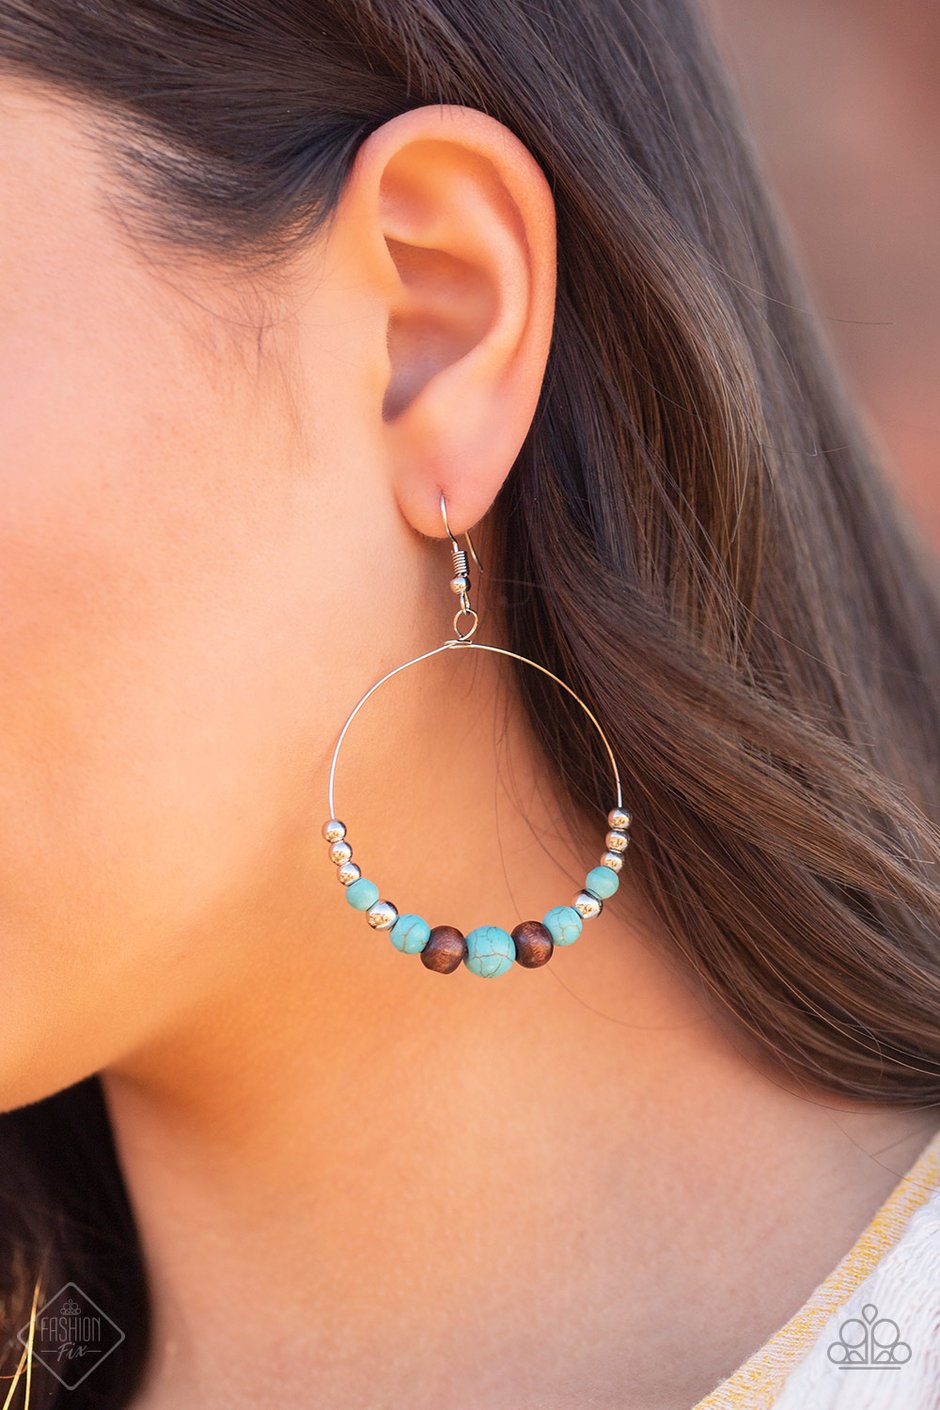 Paparazzi Accessories - Serenely Southwestern - Turquoise (Blue) Earrings